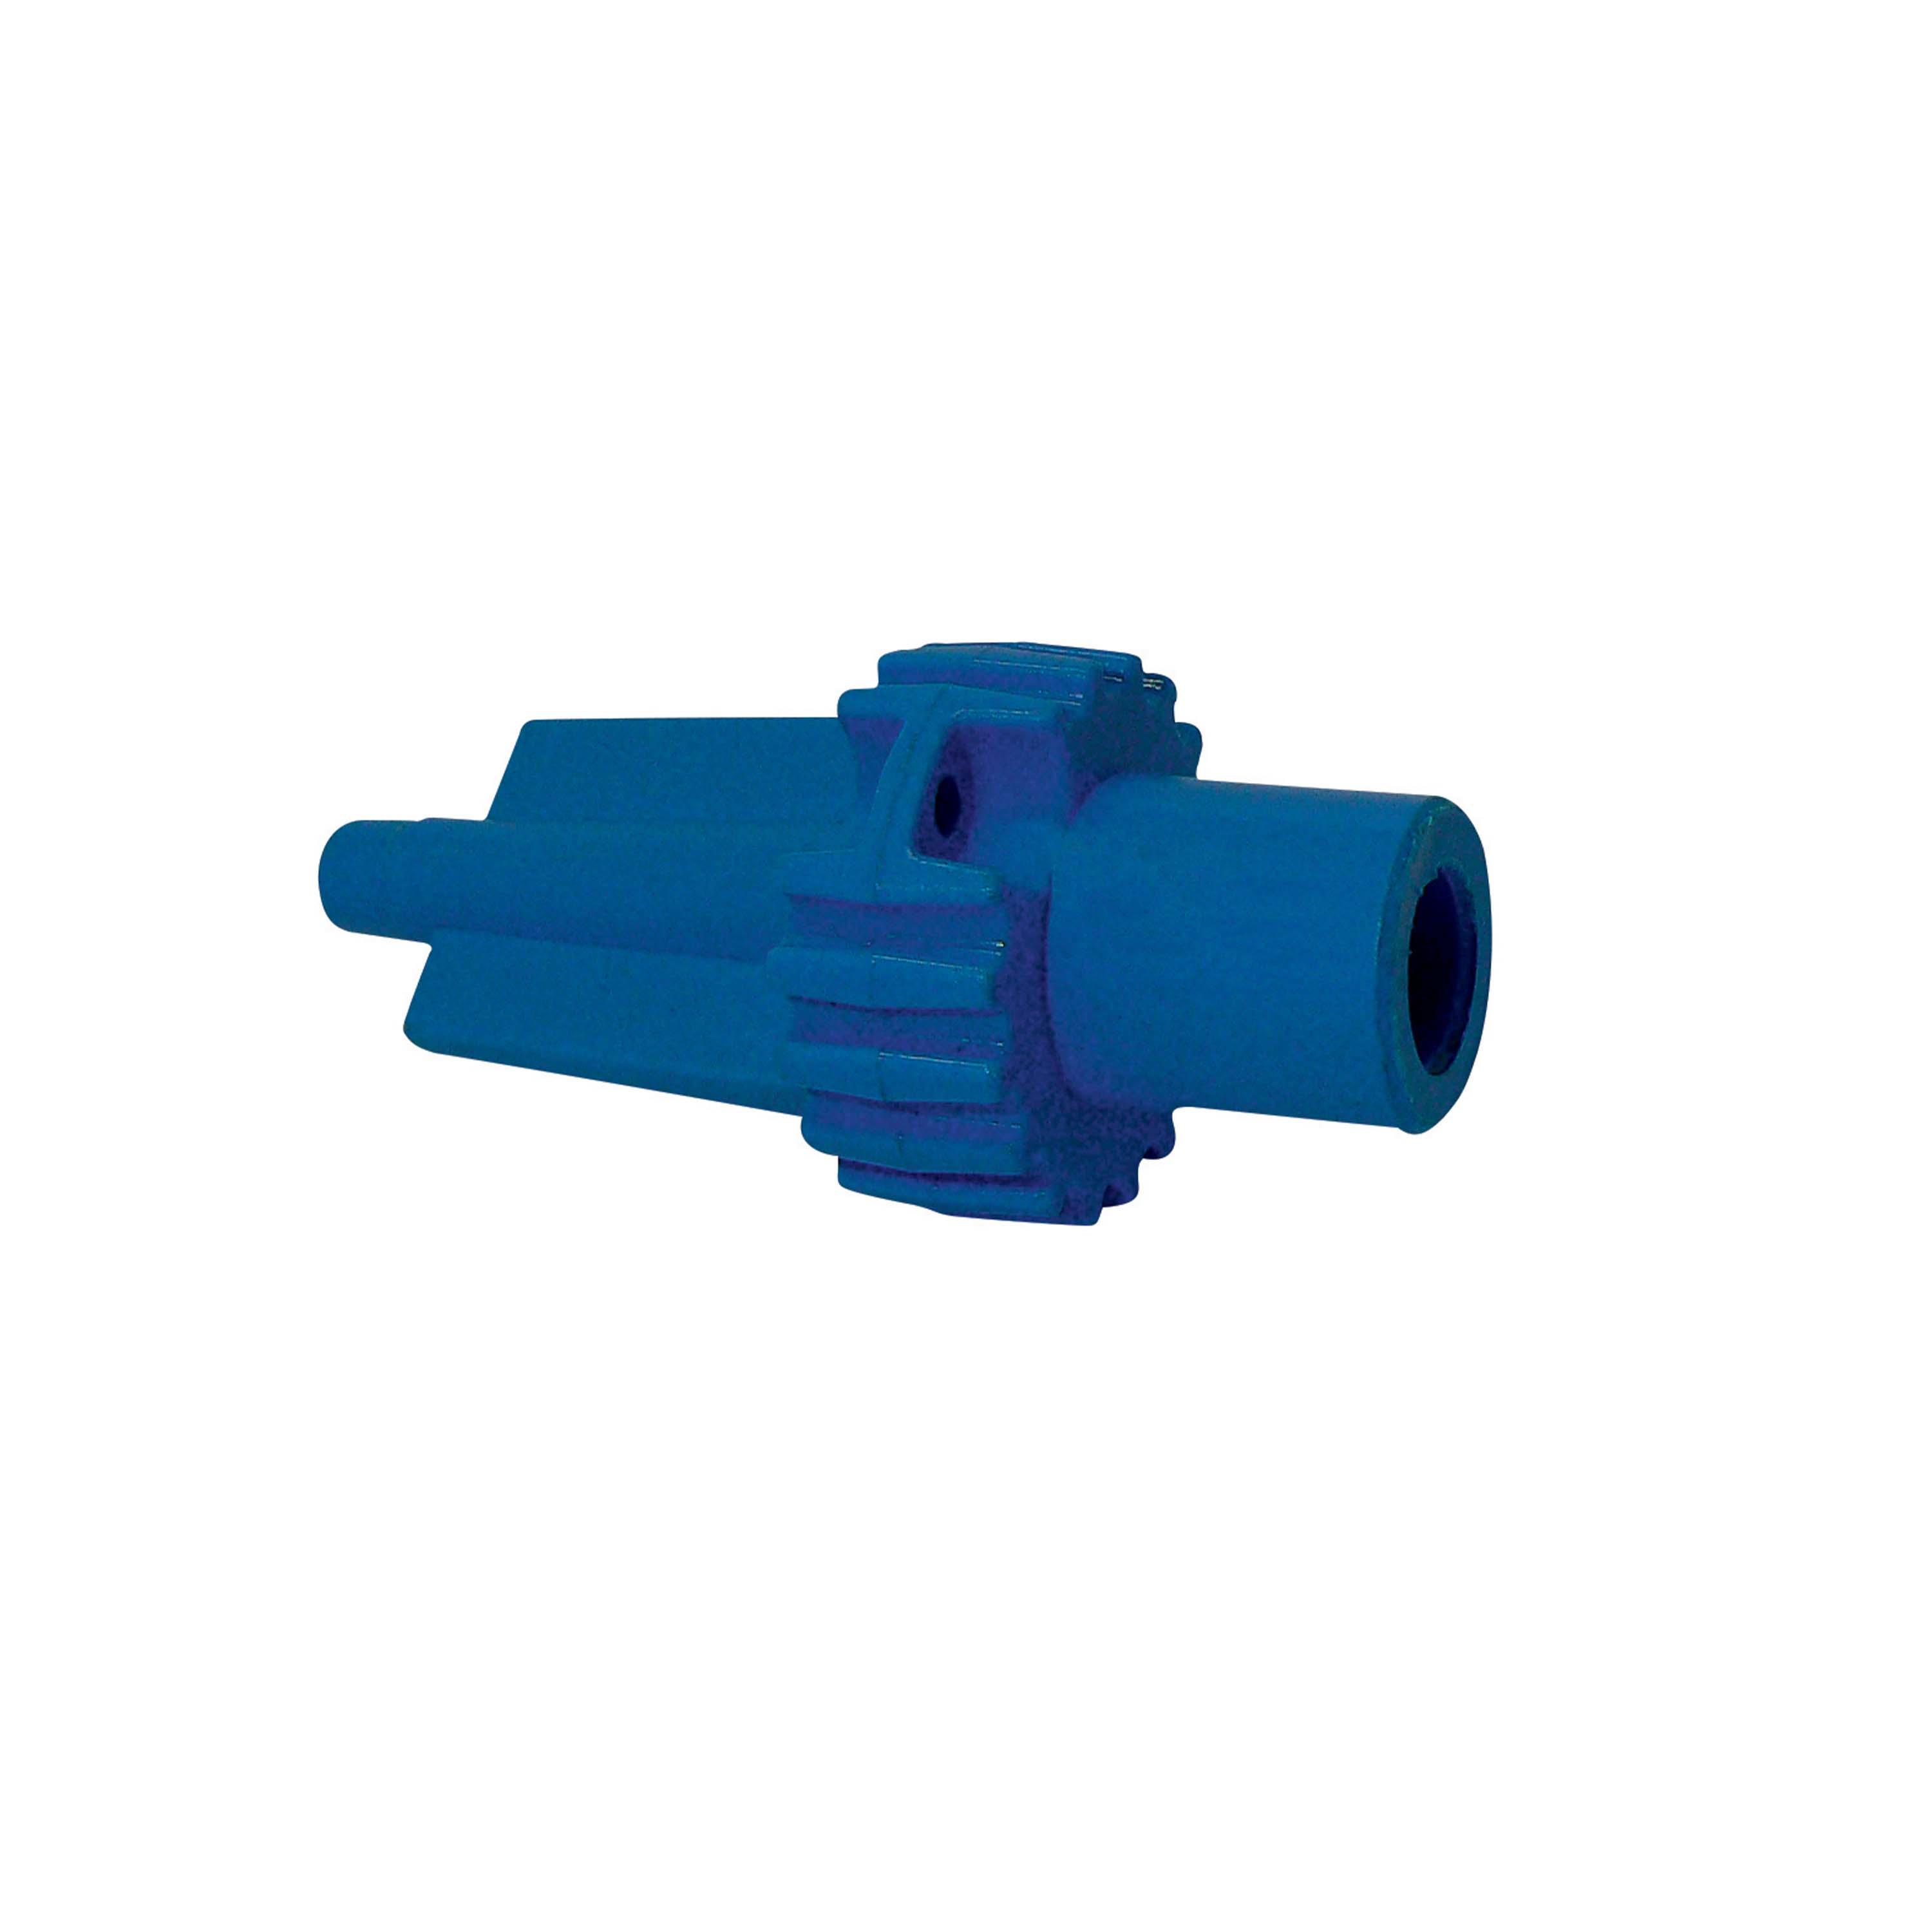 PLASTIMO Adapter for boat fender and bumper valve connector